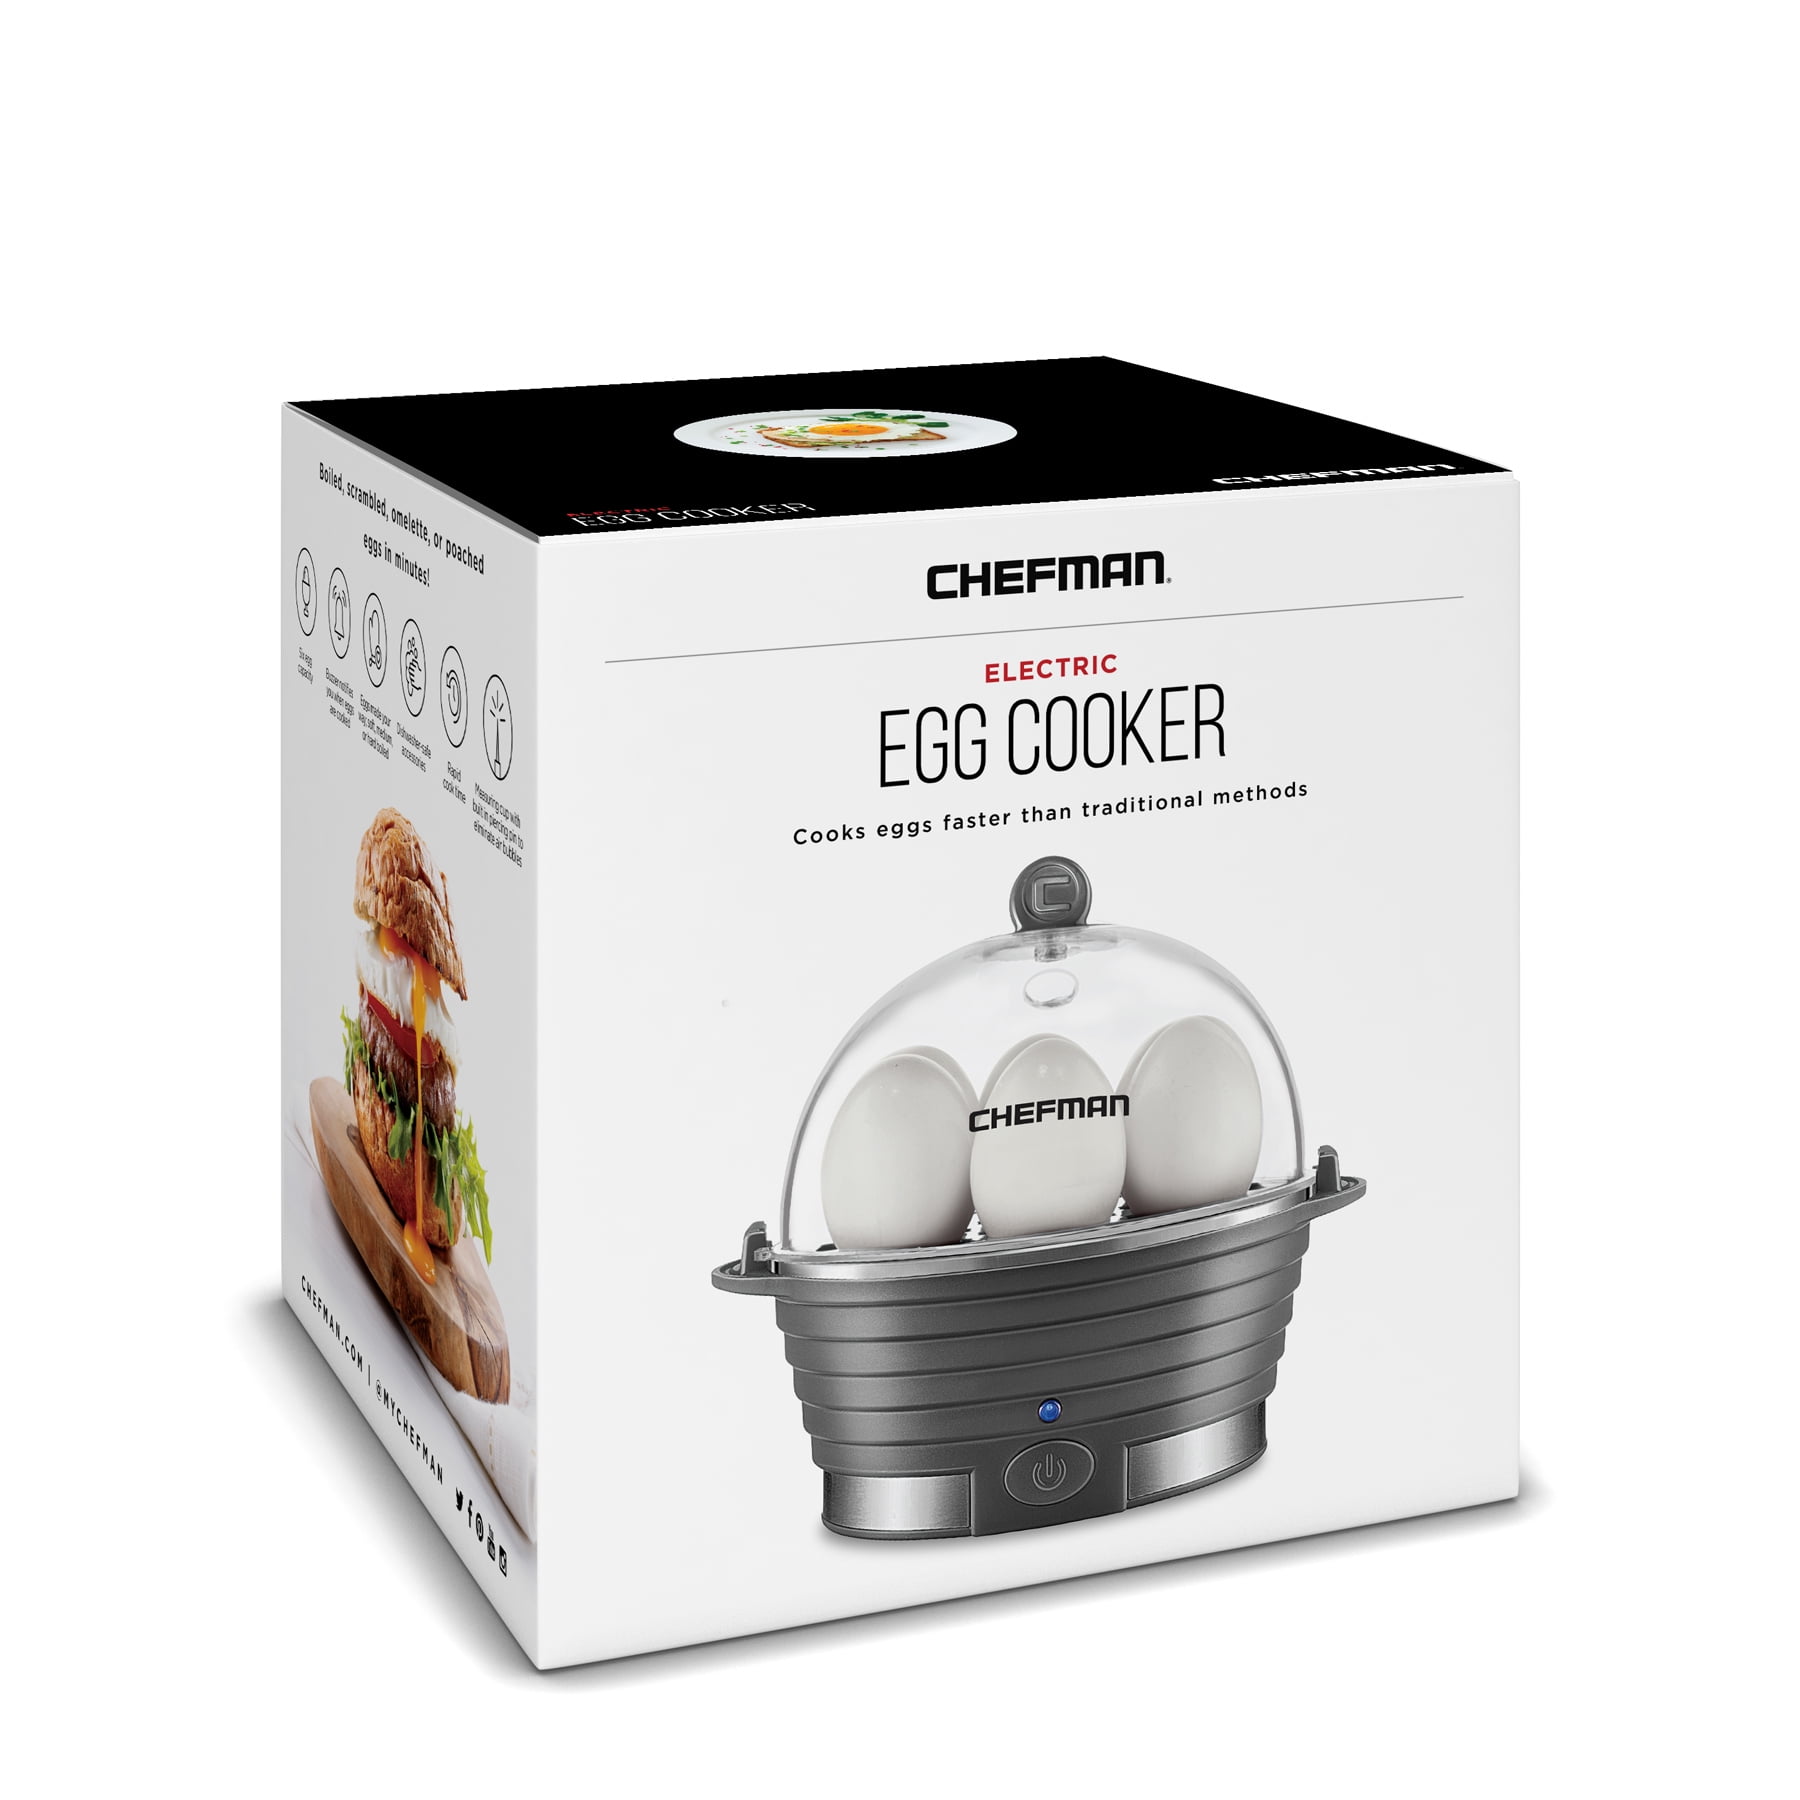 ChefmanundefinedElectric Egg Cooker Boiler, Quickly Makes 6 Eggs, BPA-Free,  Red - Bed Bath & Beyond - 32690792